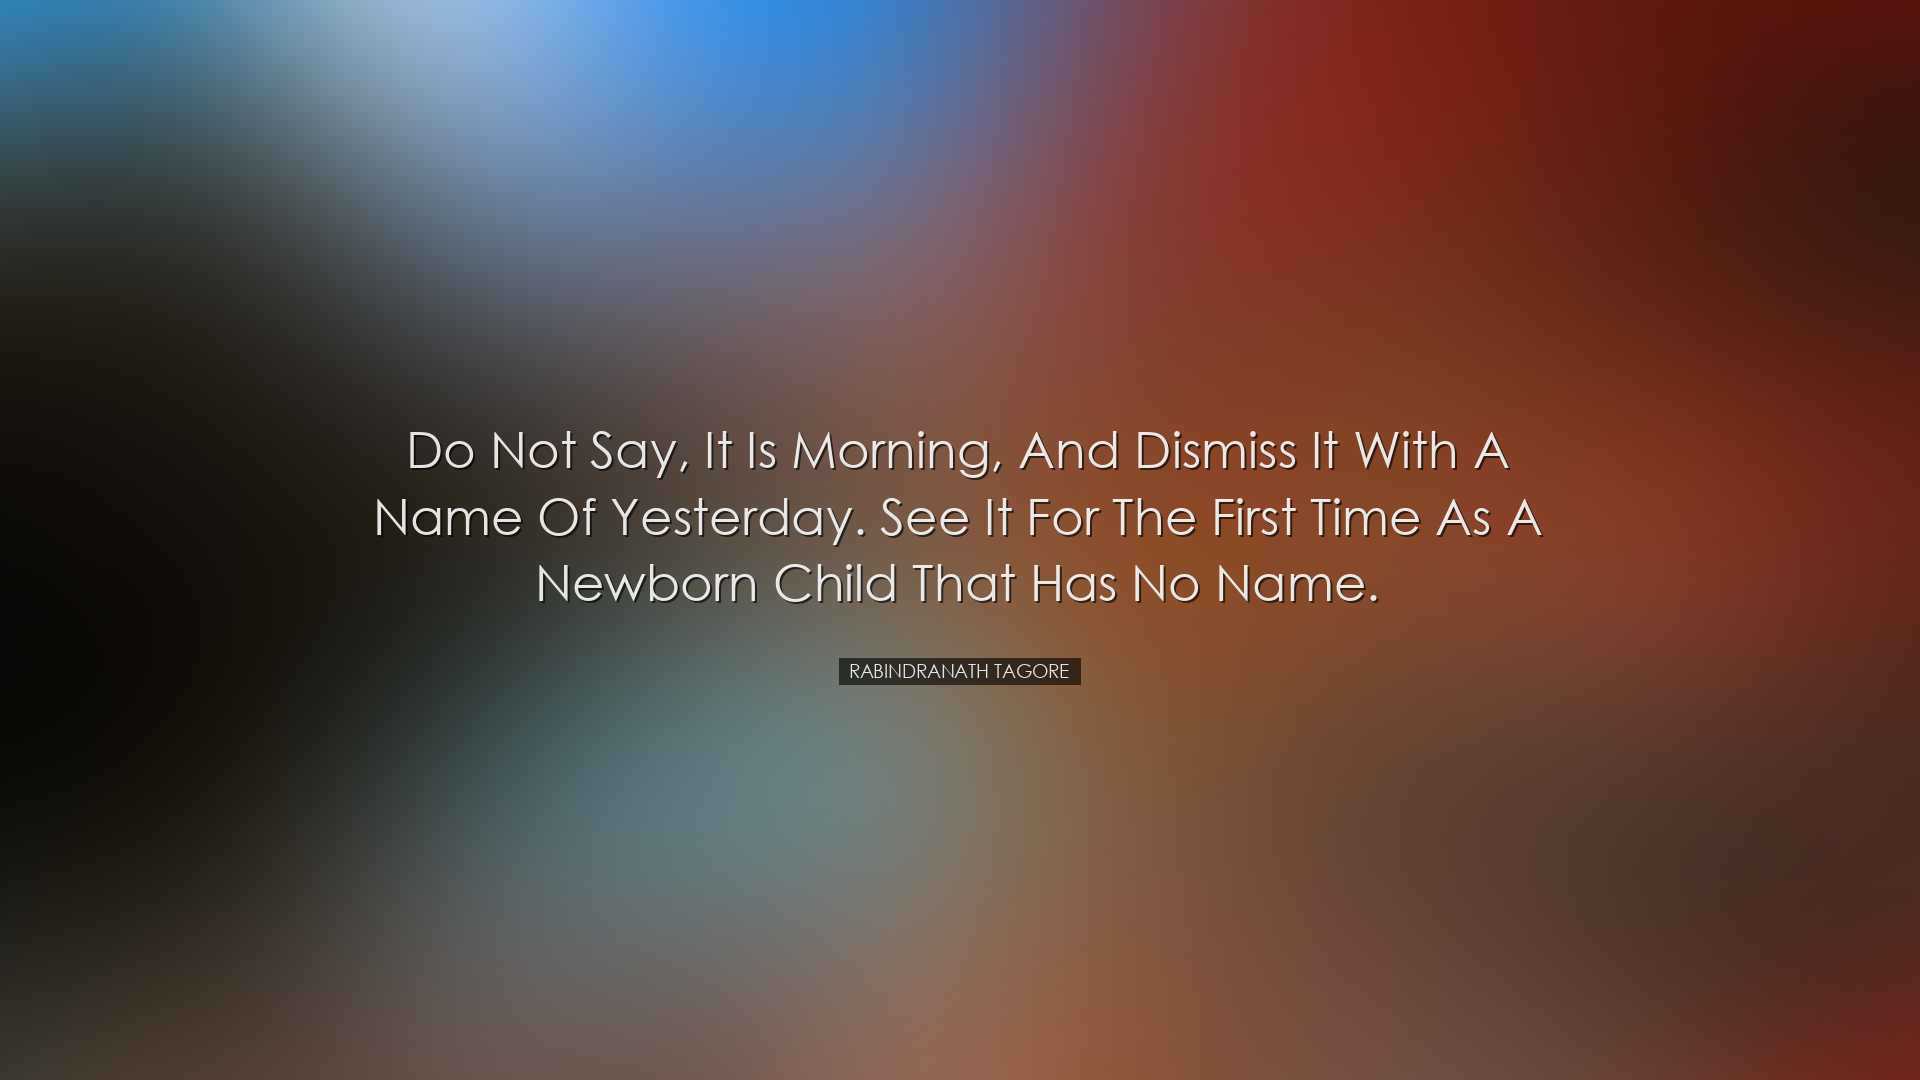 Do not say, It is morning, and dismiss it with a name of yesterday